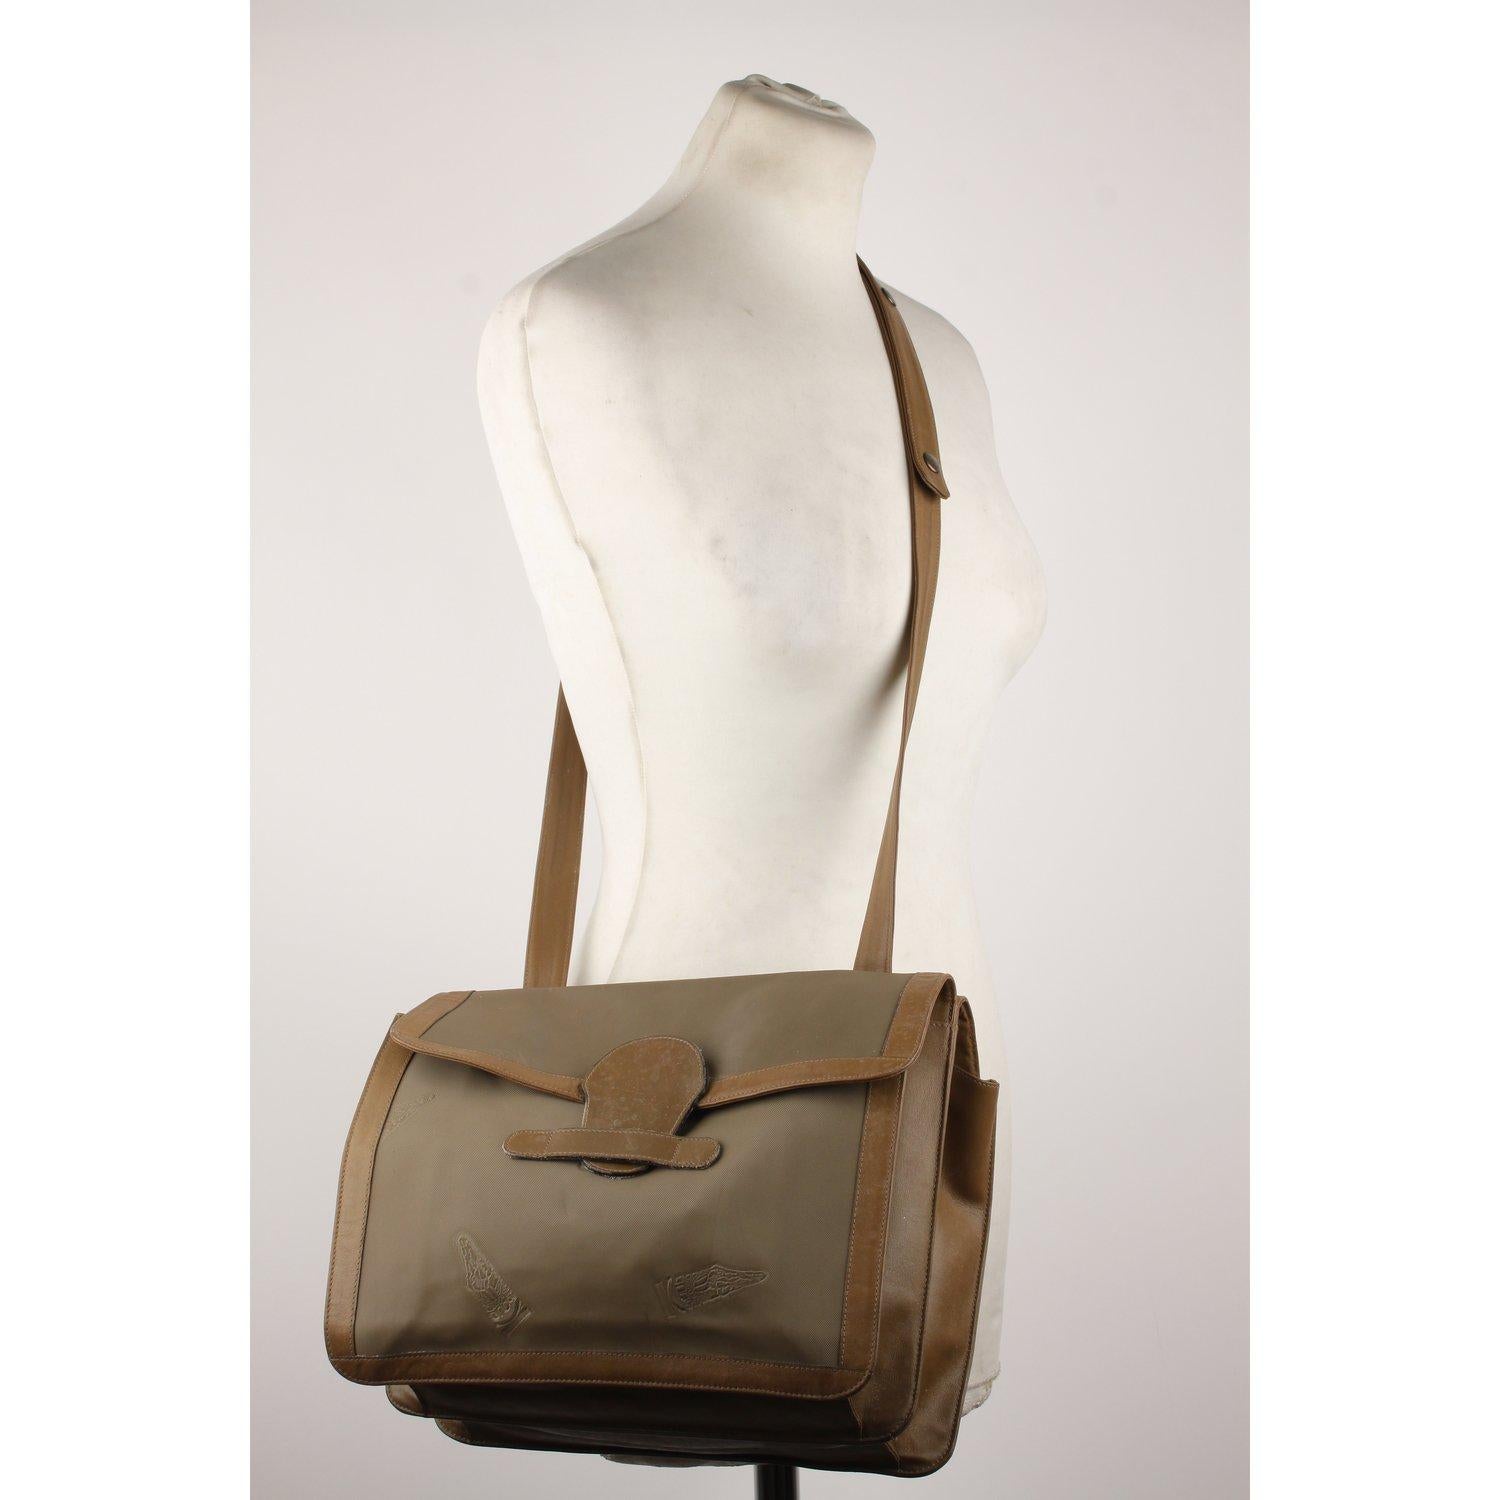 MATERIAL: Canvas COLOR: Green MODEL: Messenger Bag GENDER: Women SIZE: Medium Condition CONDITION DETAILS: B :GOOD CONDITION - Some light wear of use - Some scratches on leather trim due to normal use, some wear of use on the internal lining